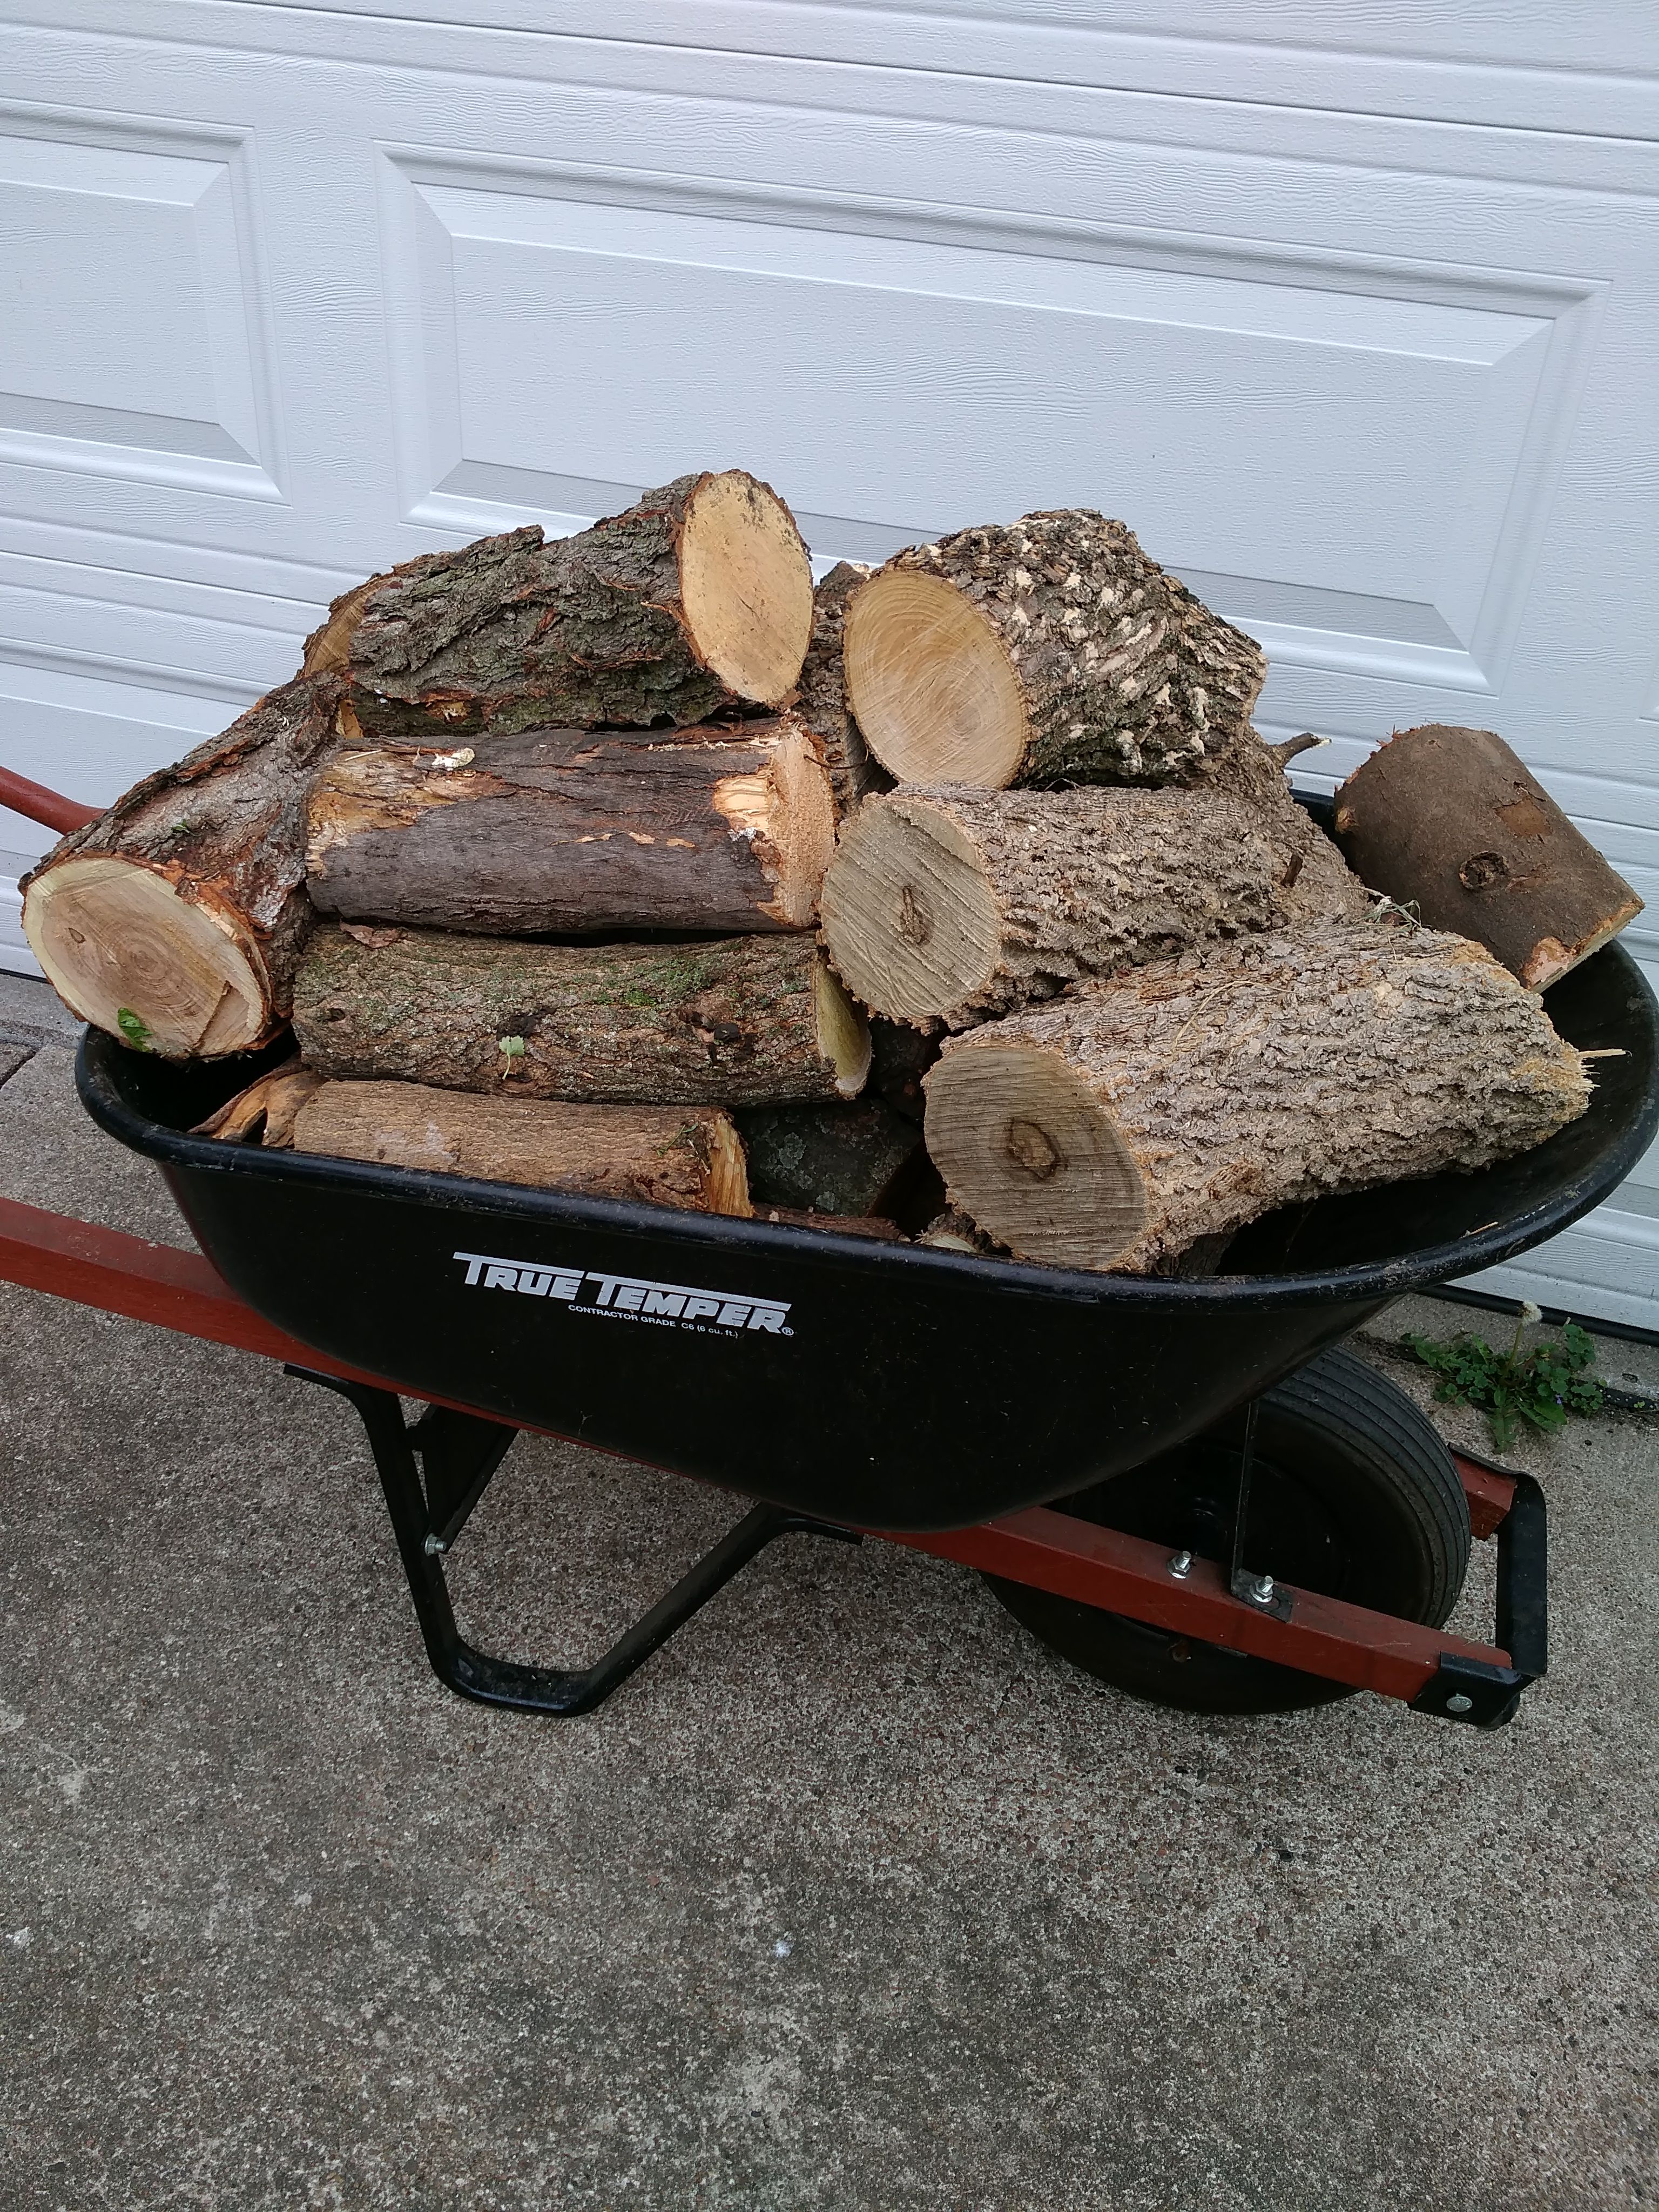 In Lincoln Wheel Barrel Full Firewood Can Deliver!